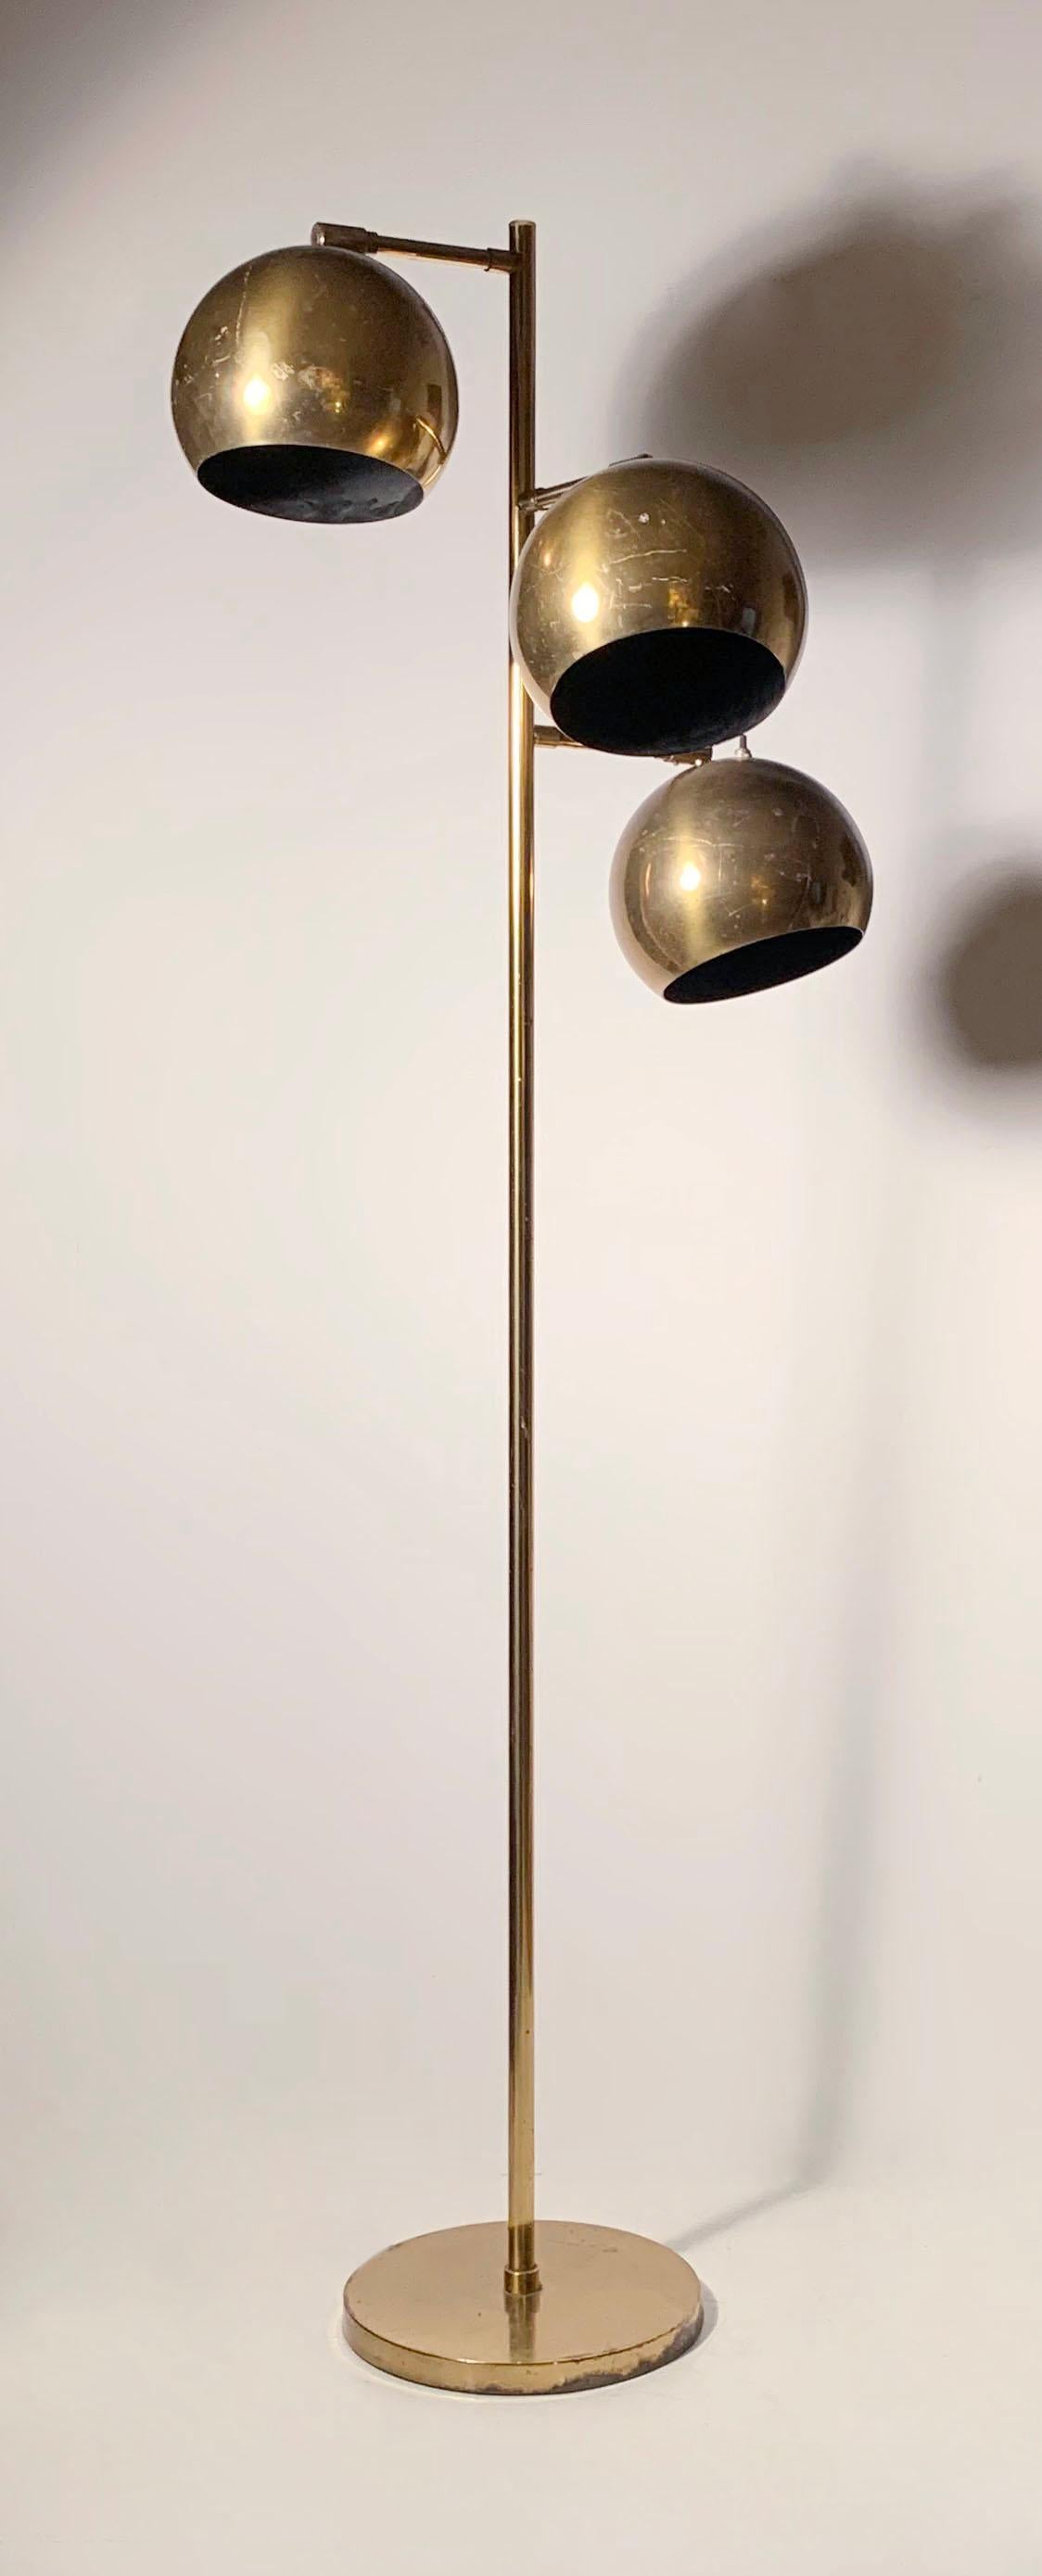 Vintage PAIR of Koch & Lowy Brass Triple Ball Articulating Floor Lamp
Manner of Angelo Lelli for Arredoluce

some mild denting on shades where they turn against the joint. 
Base has mild rust commensurate with age. 
overall in good vintage